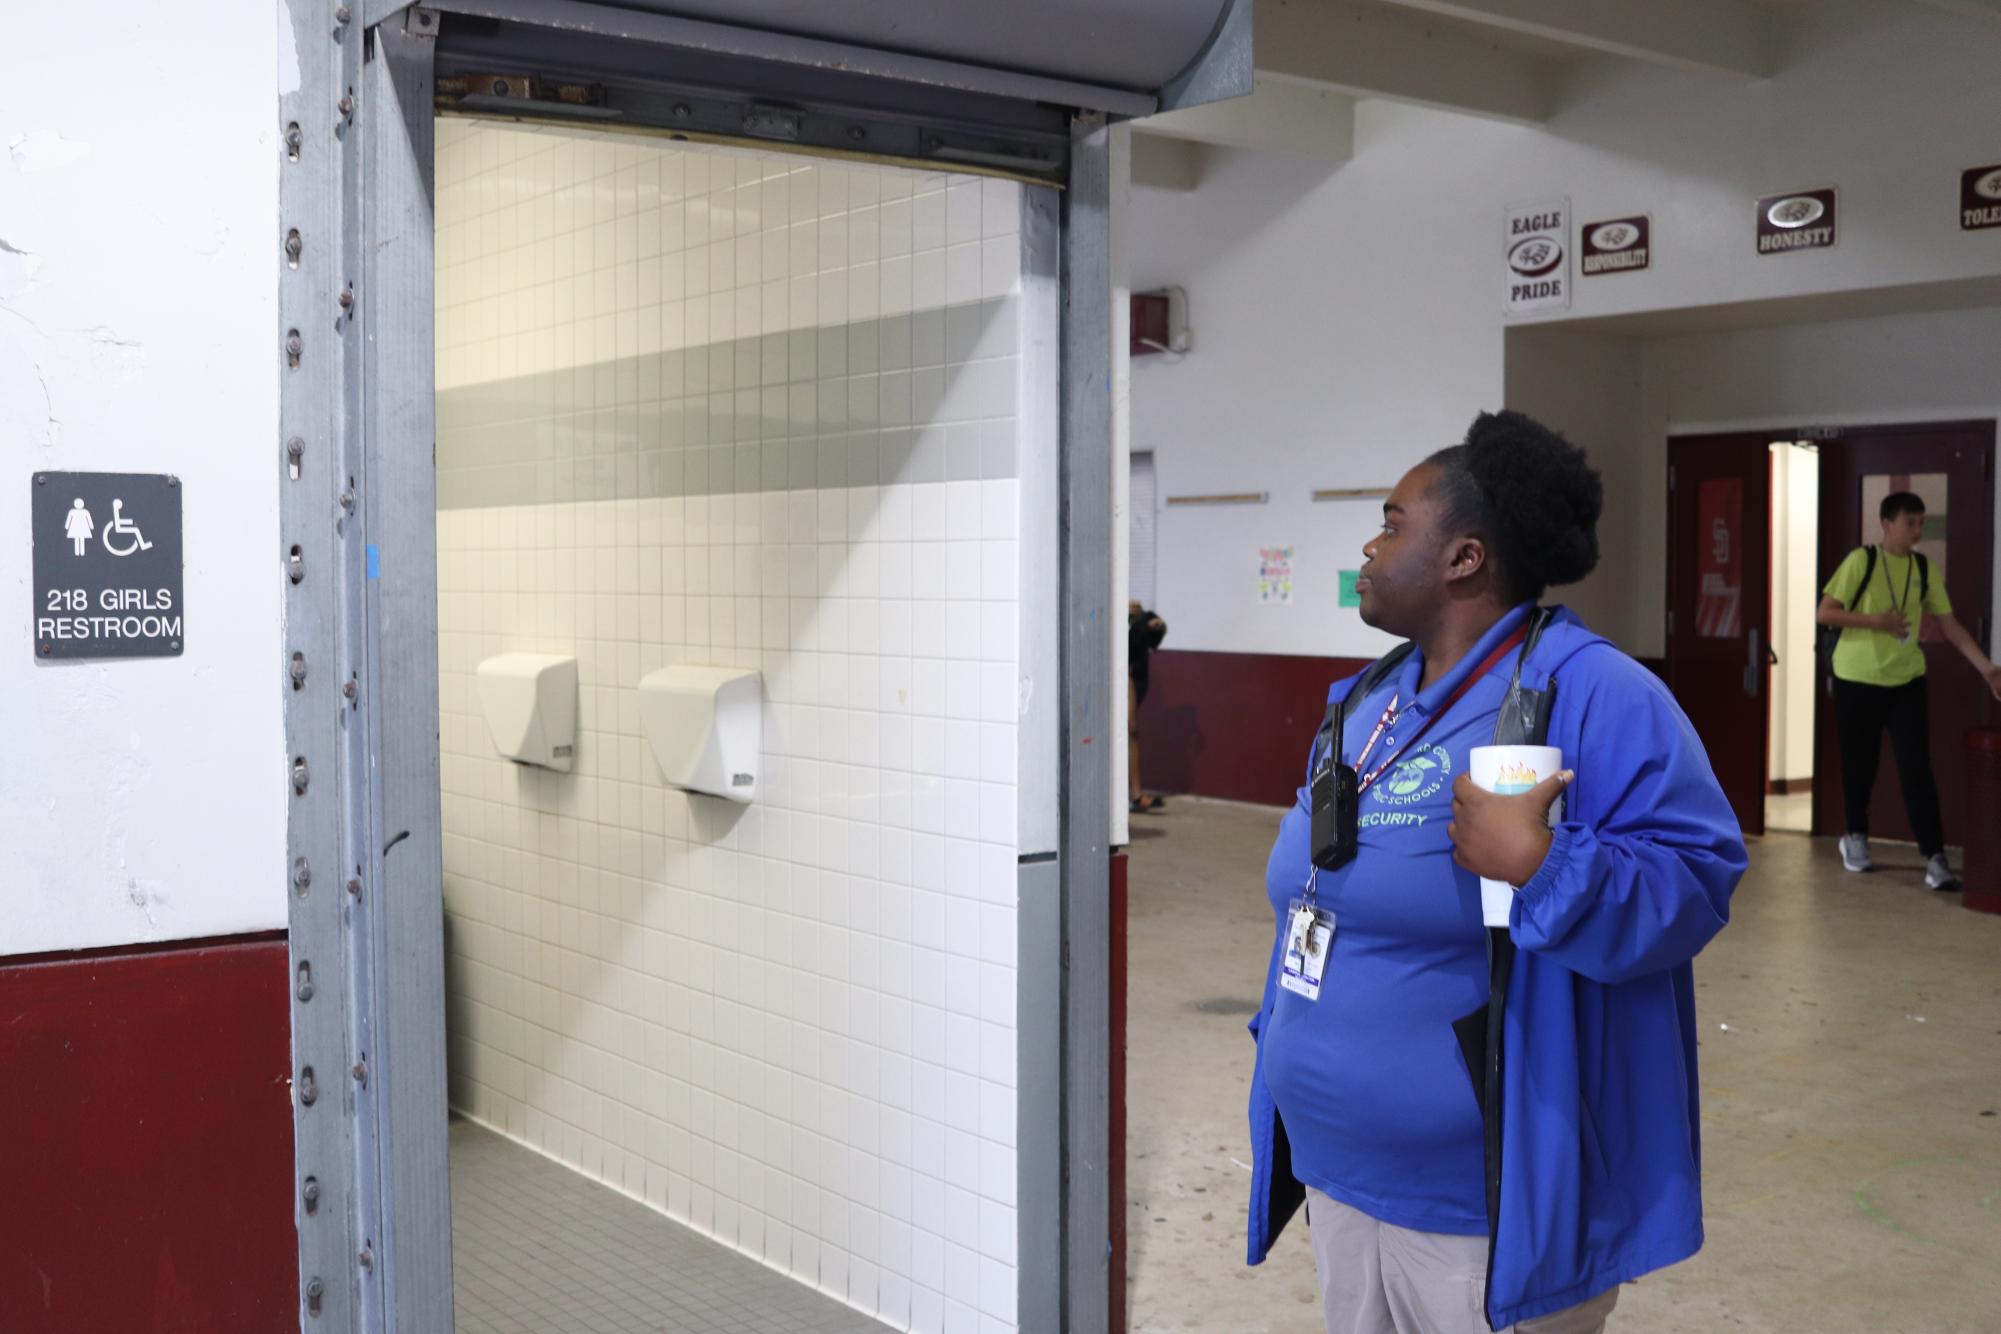 On the Job. As part of her duties as Campus Monitor Michelle Smith checks the girls’ restroom before school begins. Smith’s responsibilities include frequent bathroom checks to ensure students are respecting school rules. “Overall, I just make sure everyone on campus is safe,” Smith said. 